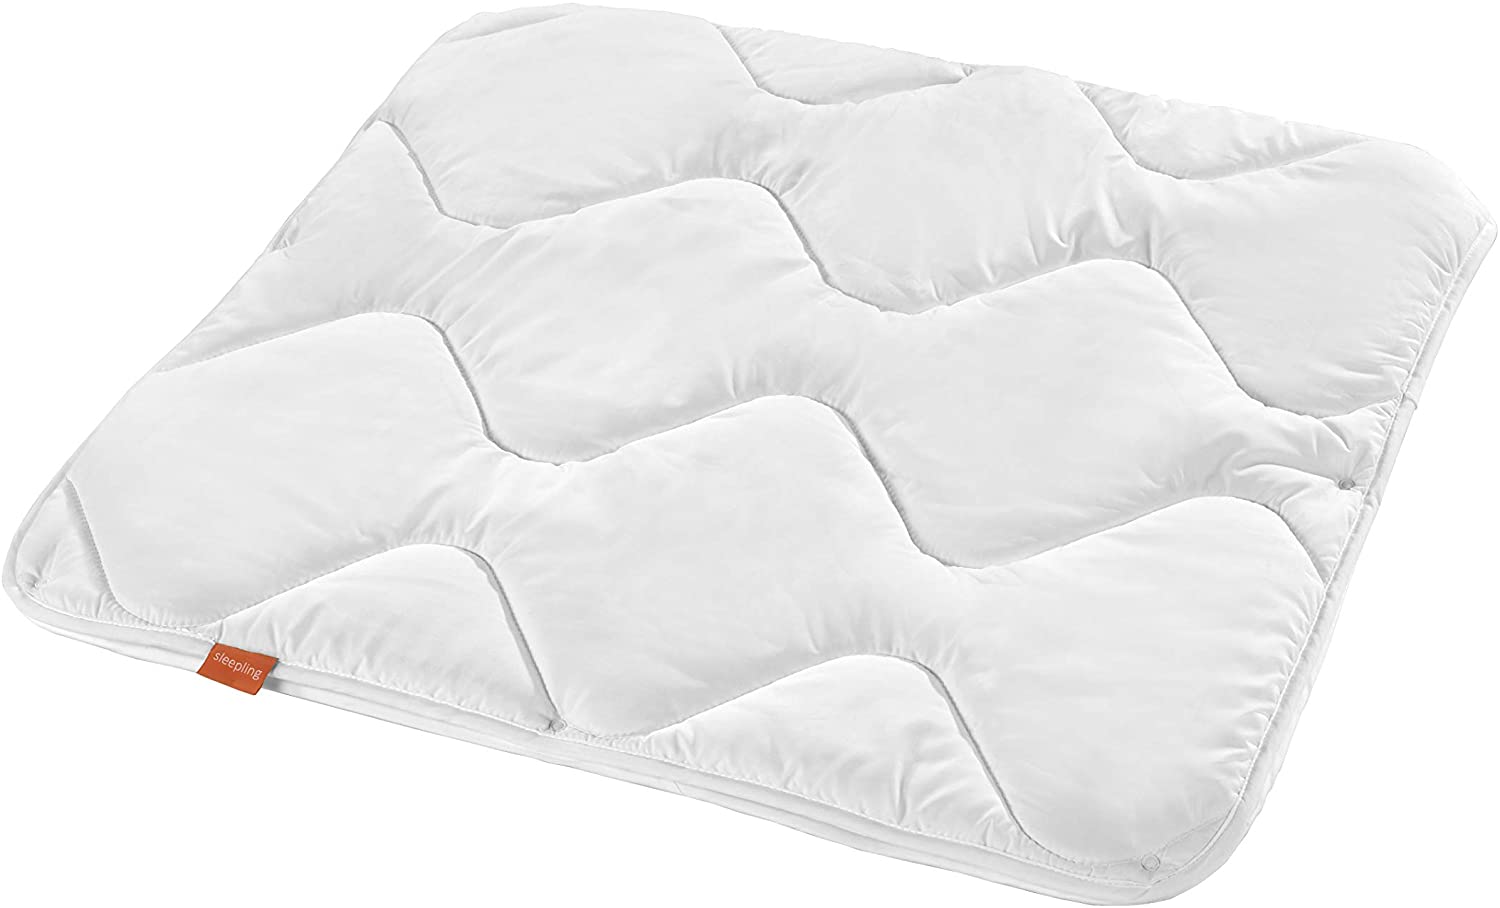 sleepling Sleeping baby blankets, baby blankets and pillow sets, white.